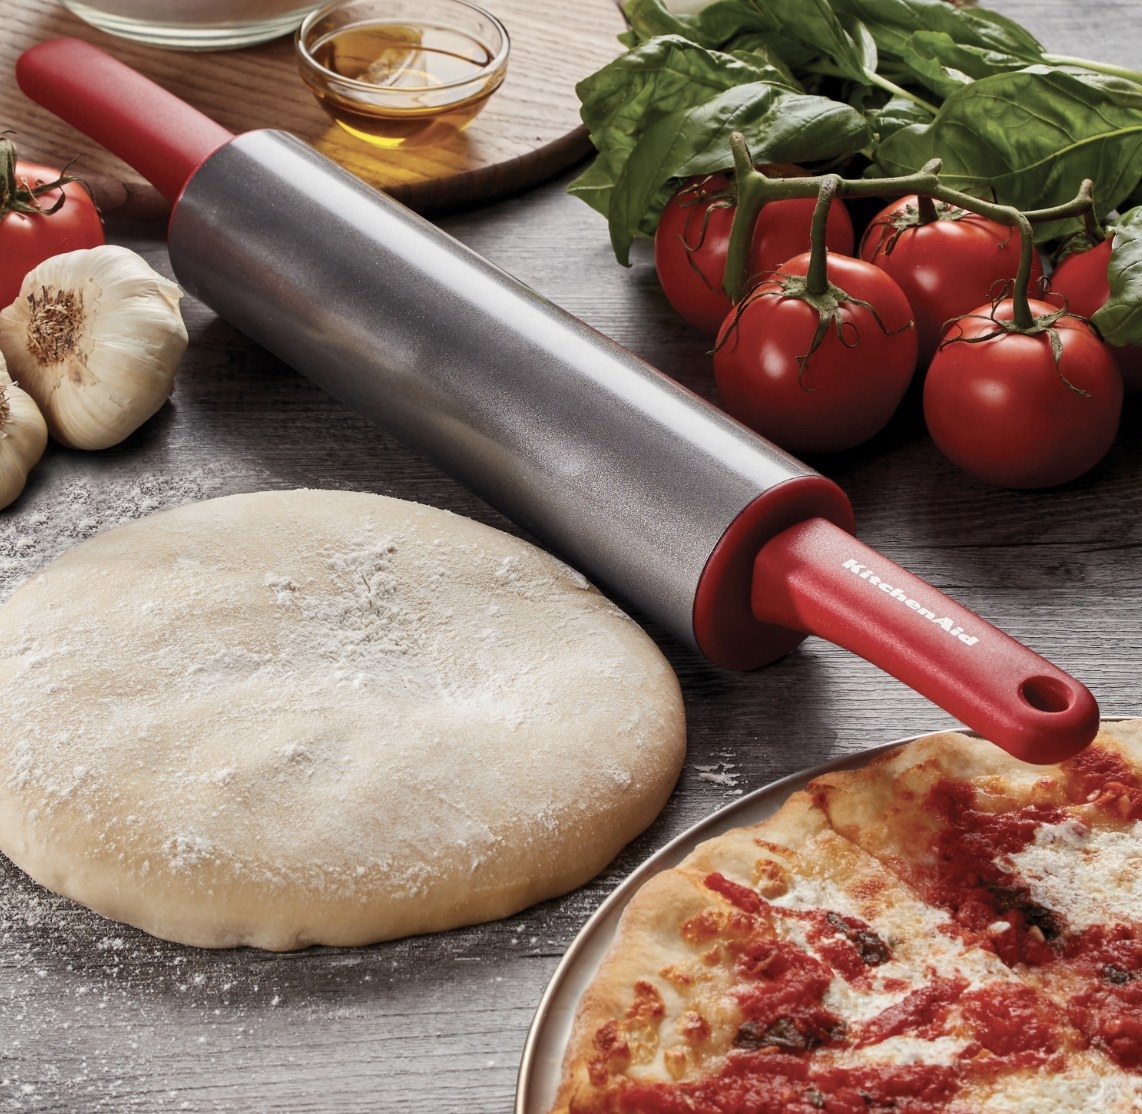 The silver and red rolling pin is surrounded by a pizza and the supplies to cook another